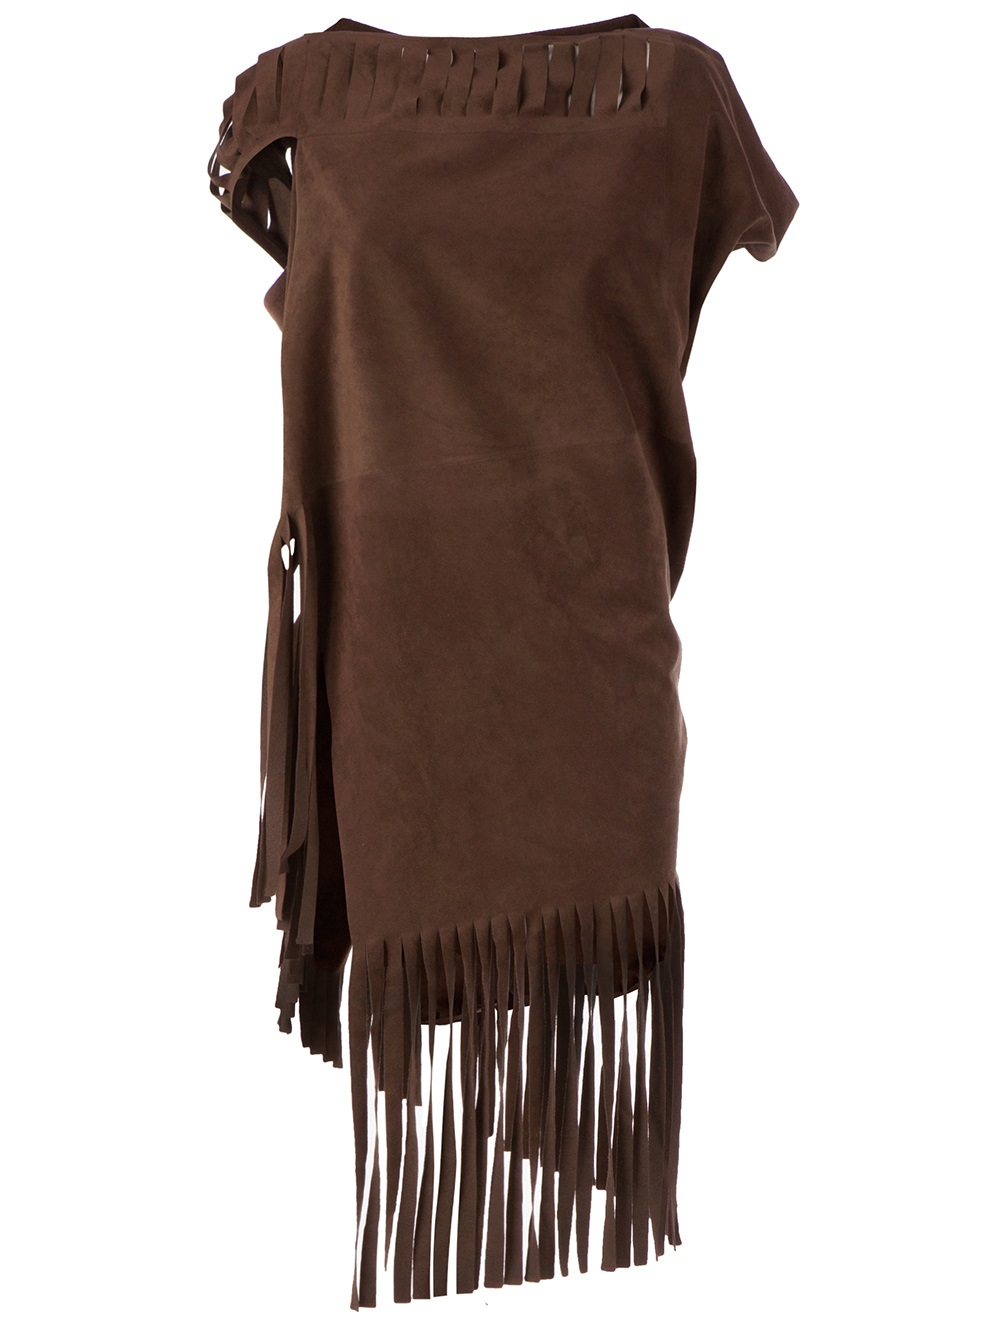 https://cdnd.lystit.com/photos/8bea-2014/01/31/junya-watanabe-comme-des-garcons-brown-fringed-faux-leather-tunic-product-1-17217285-3-675647114-normal.jpeg